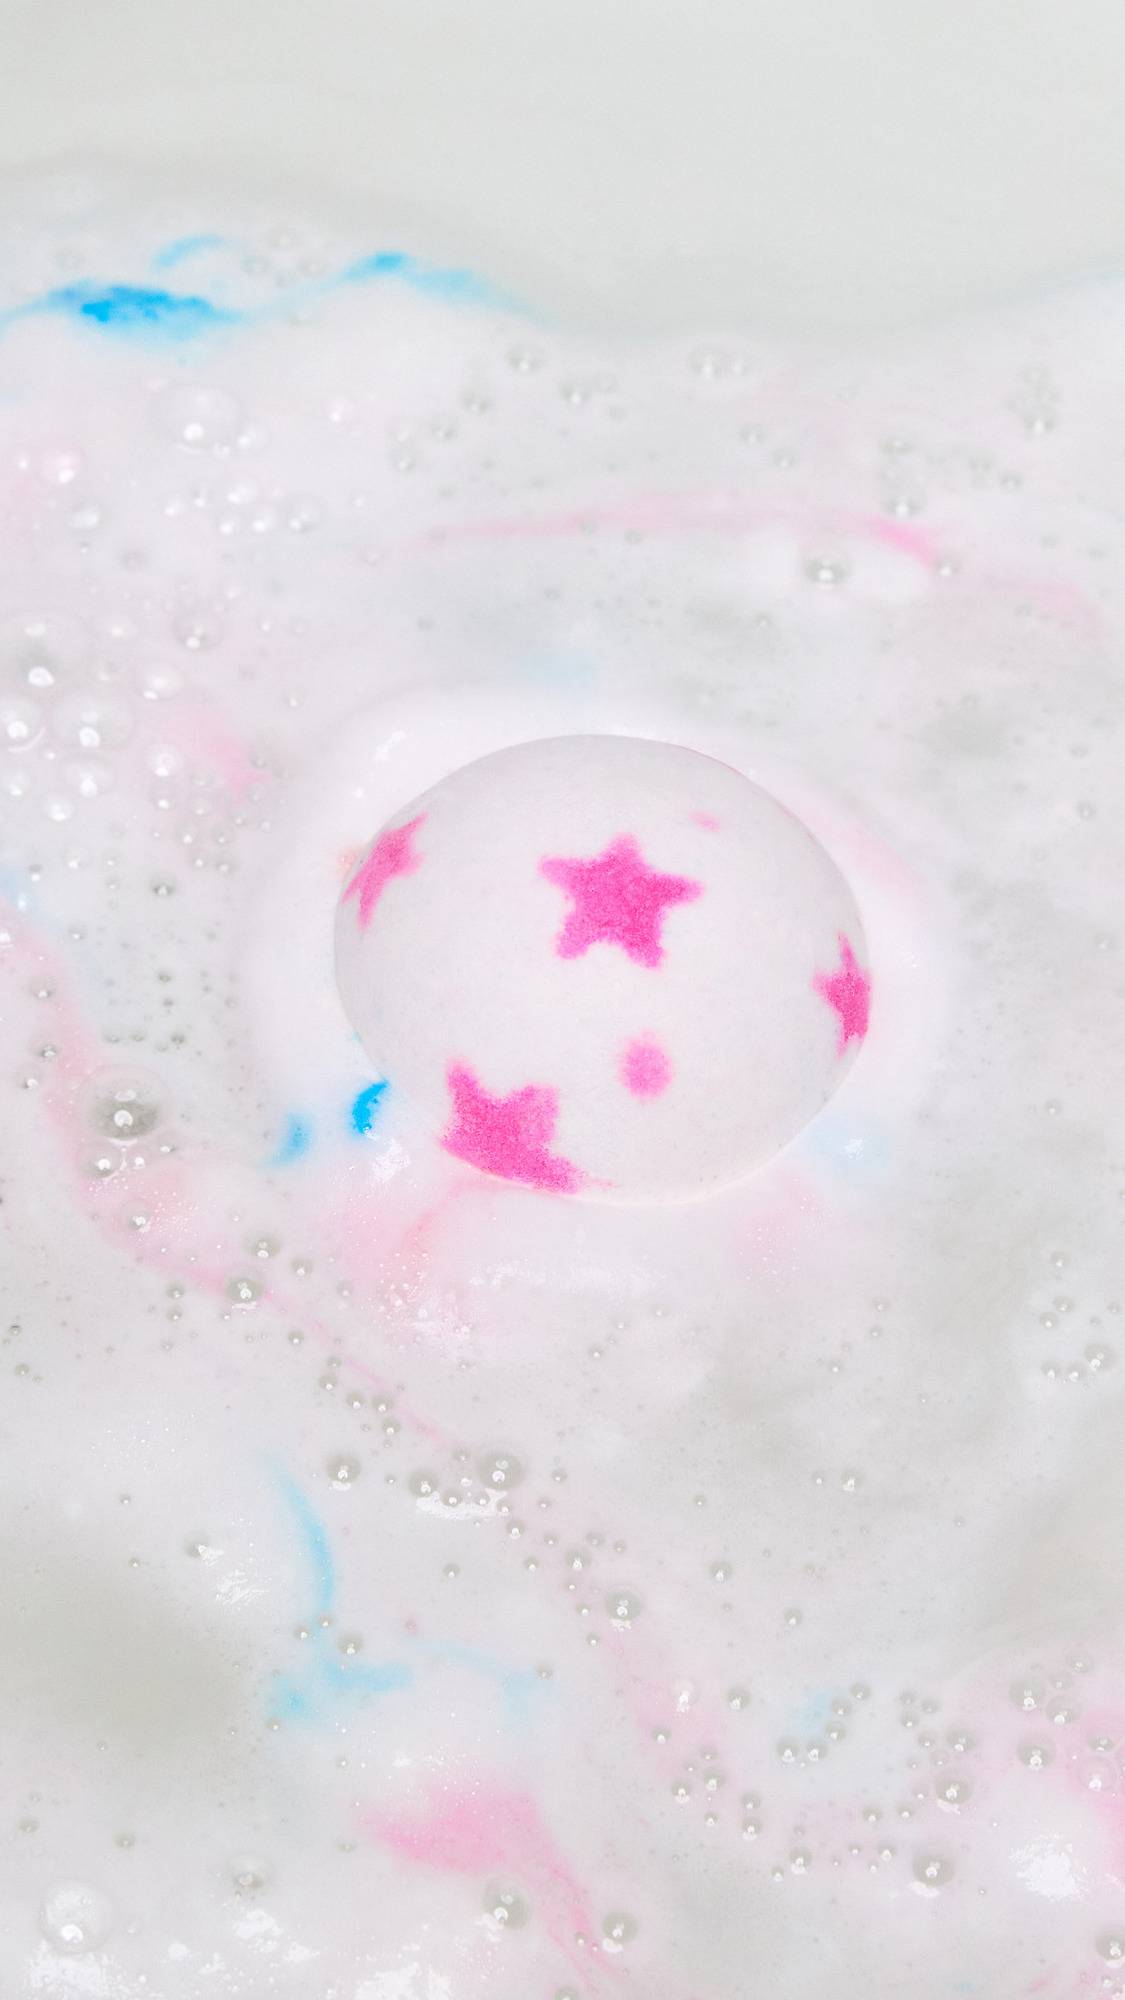 The American Dream bath bomb has just been gently placed into the bath water and is dispersing thick, foamy waves of white with flecks of pink and blue. 